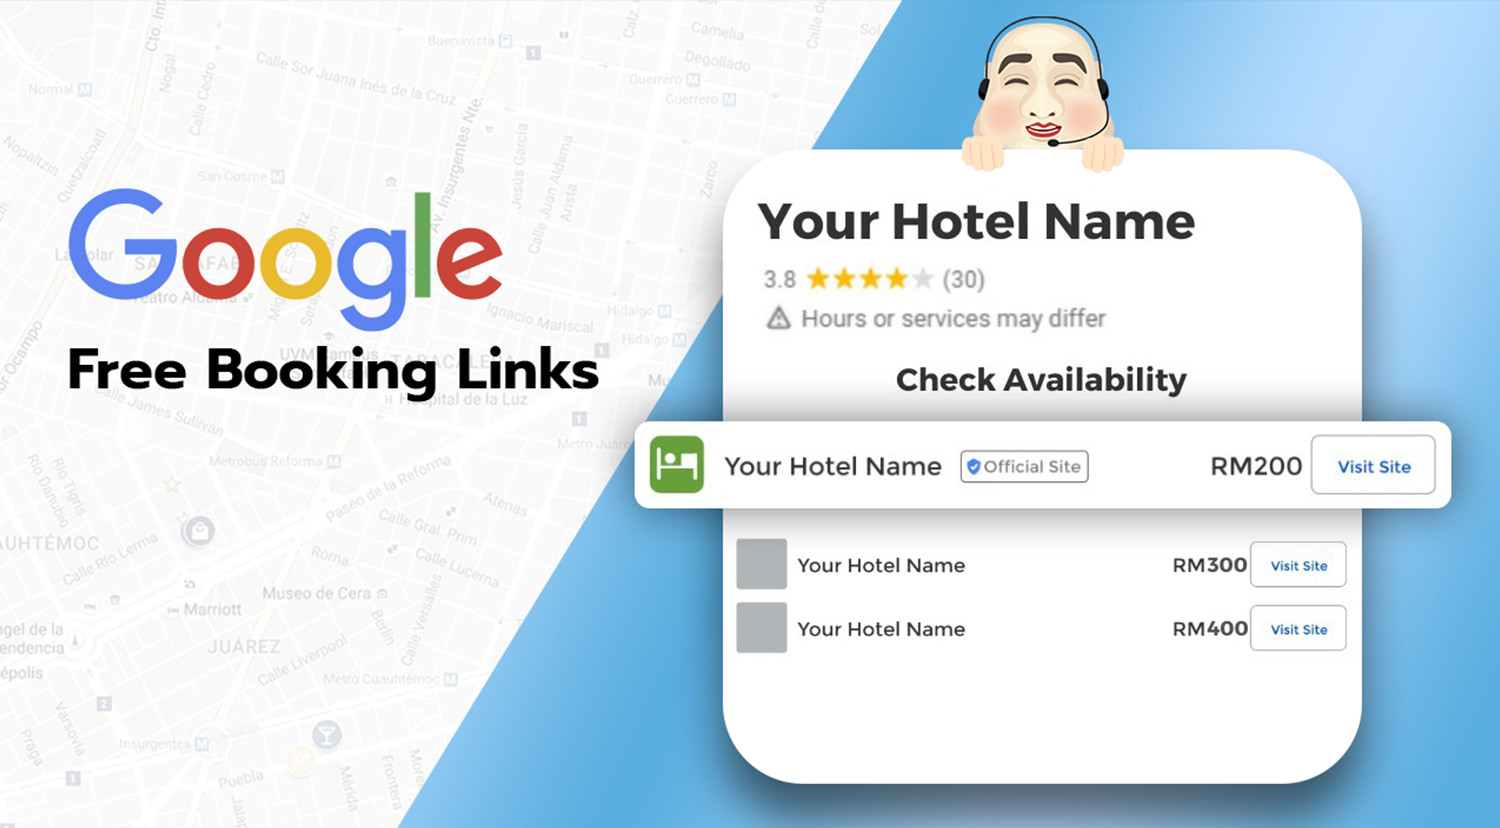 Google Free Booking Links 101 - What you should know